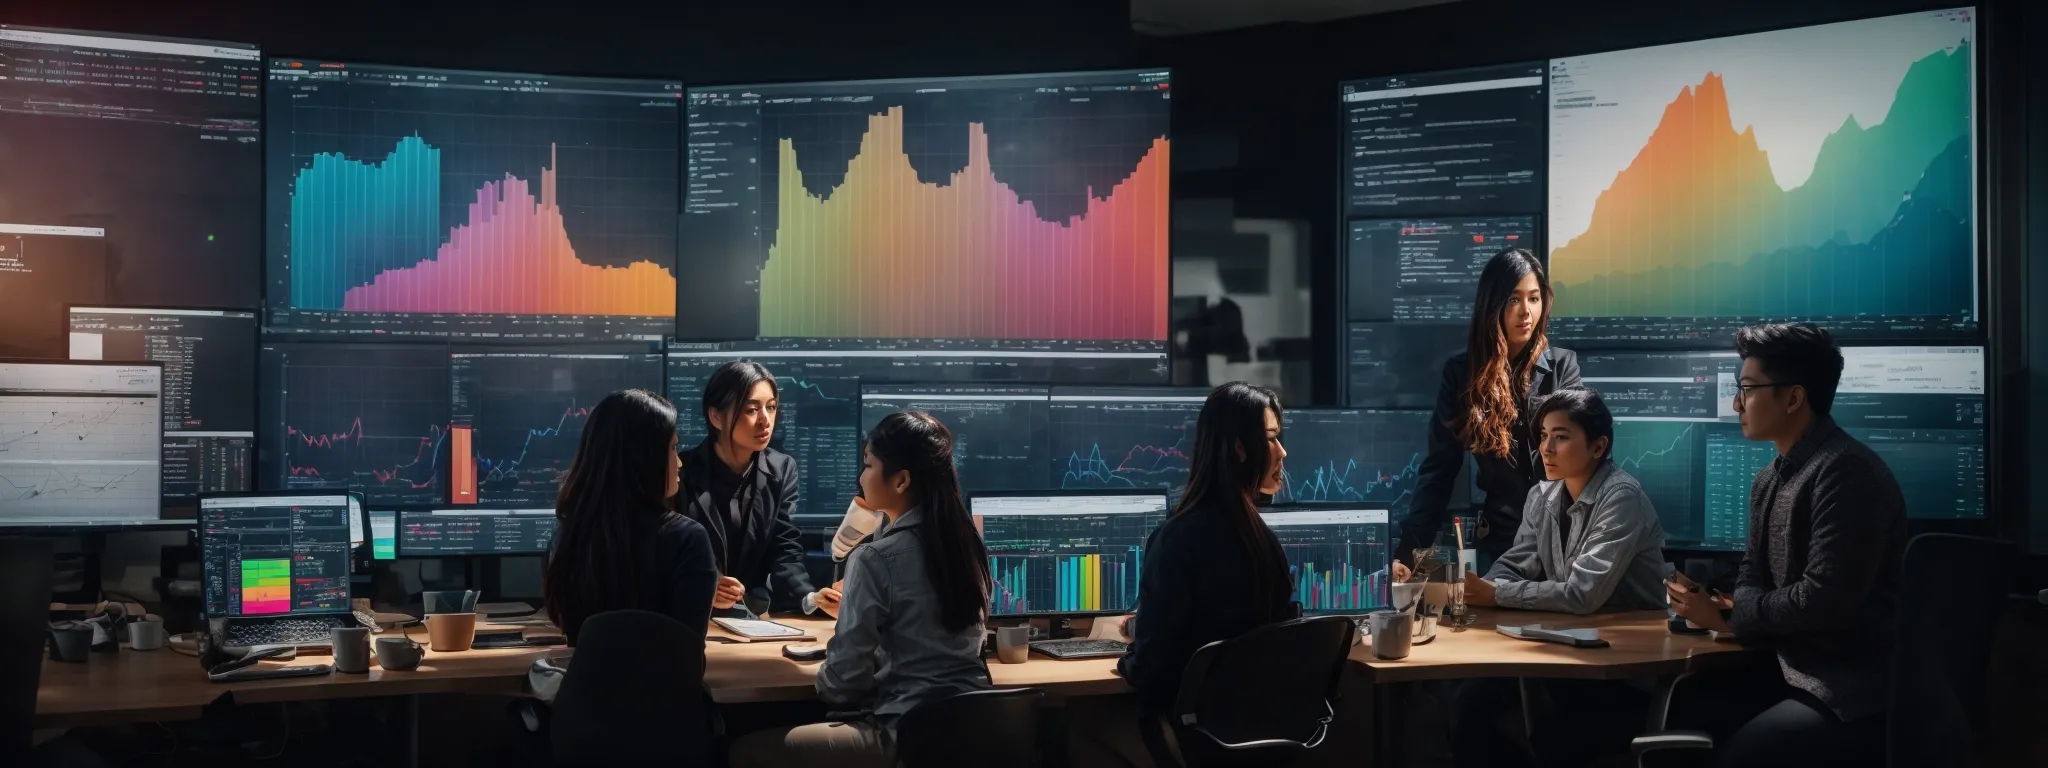 a digital marketing team gathered around a large monitor displaying colorful graphs and charts of website traffic analytics.